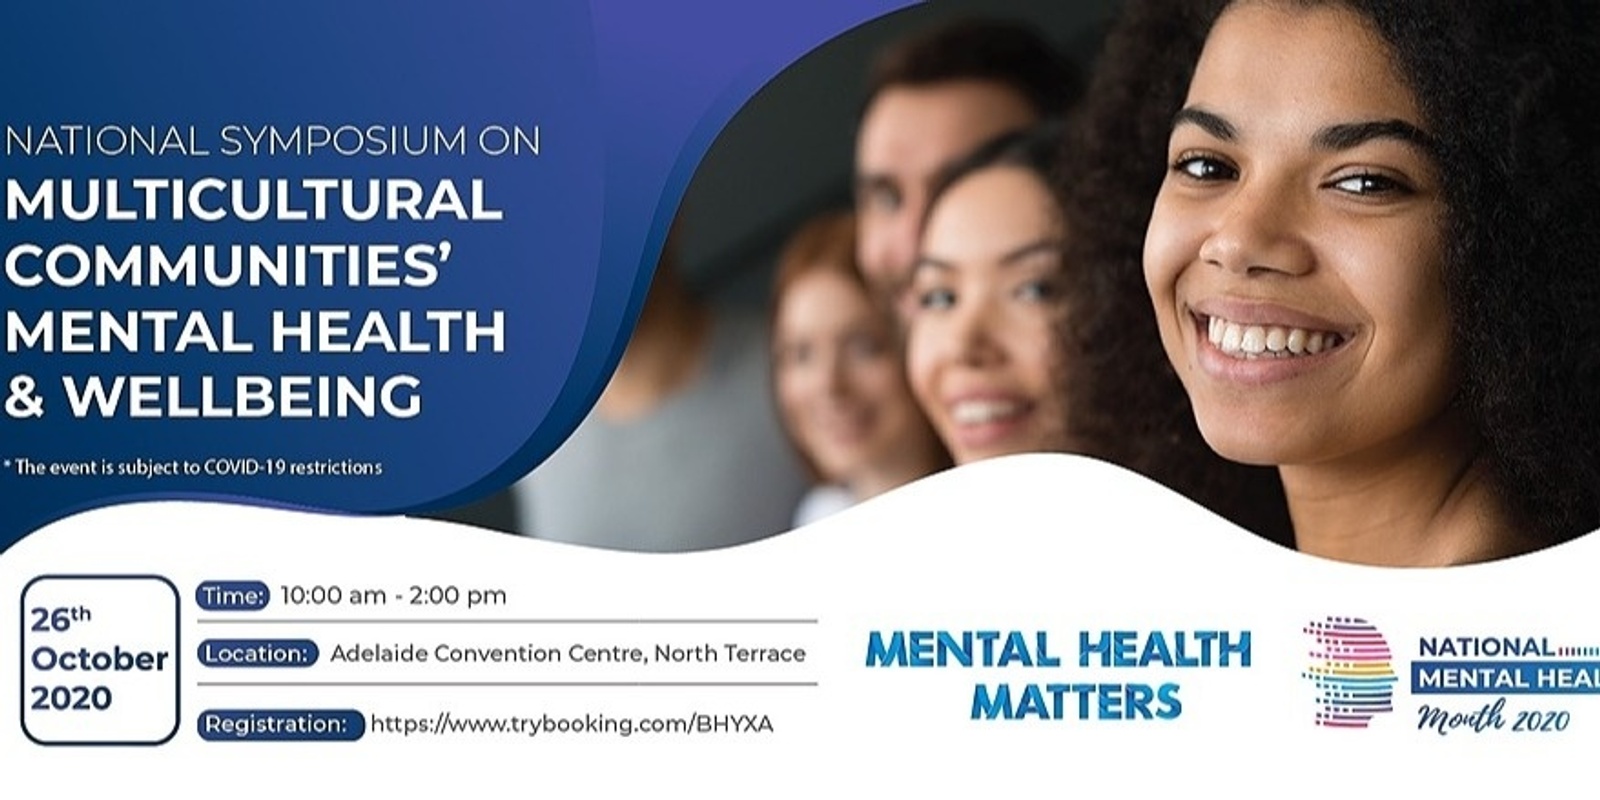 Banner image for National Symposium on Multicultural Communties' Mental Health & Wellbeing